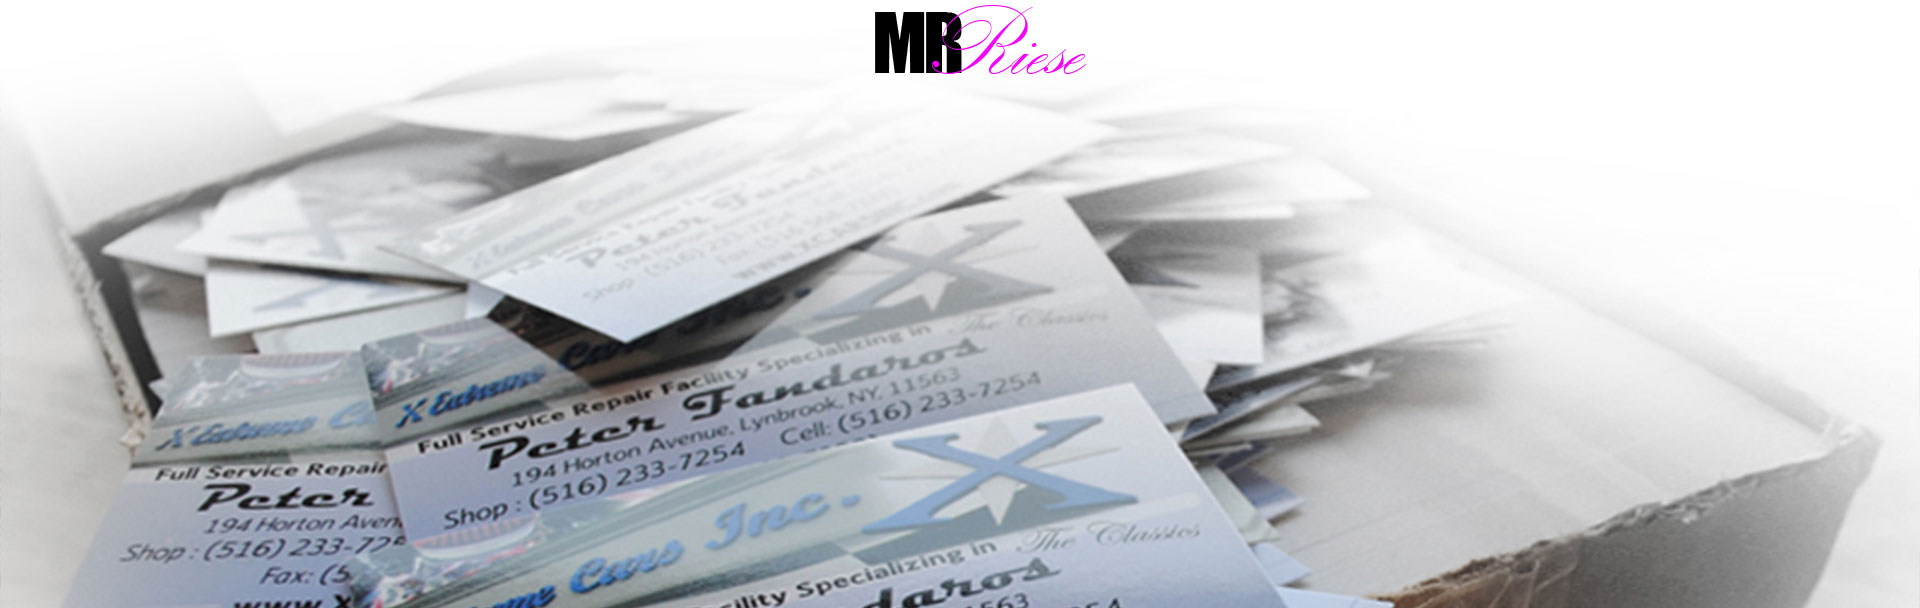 Business Card Photoshop Project | Mr. Riese